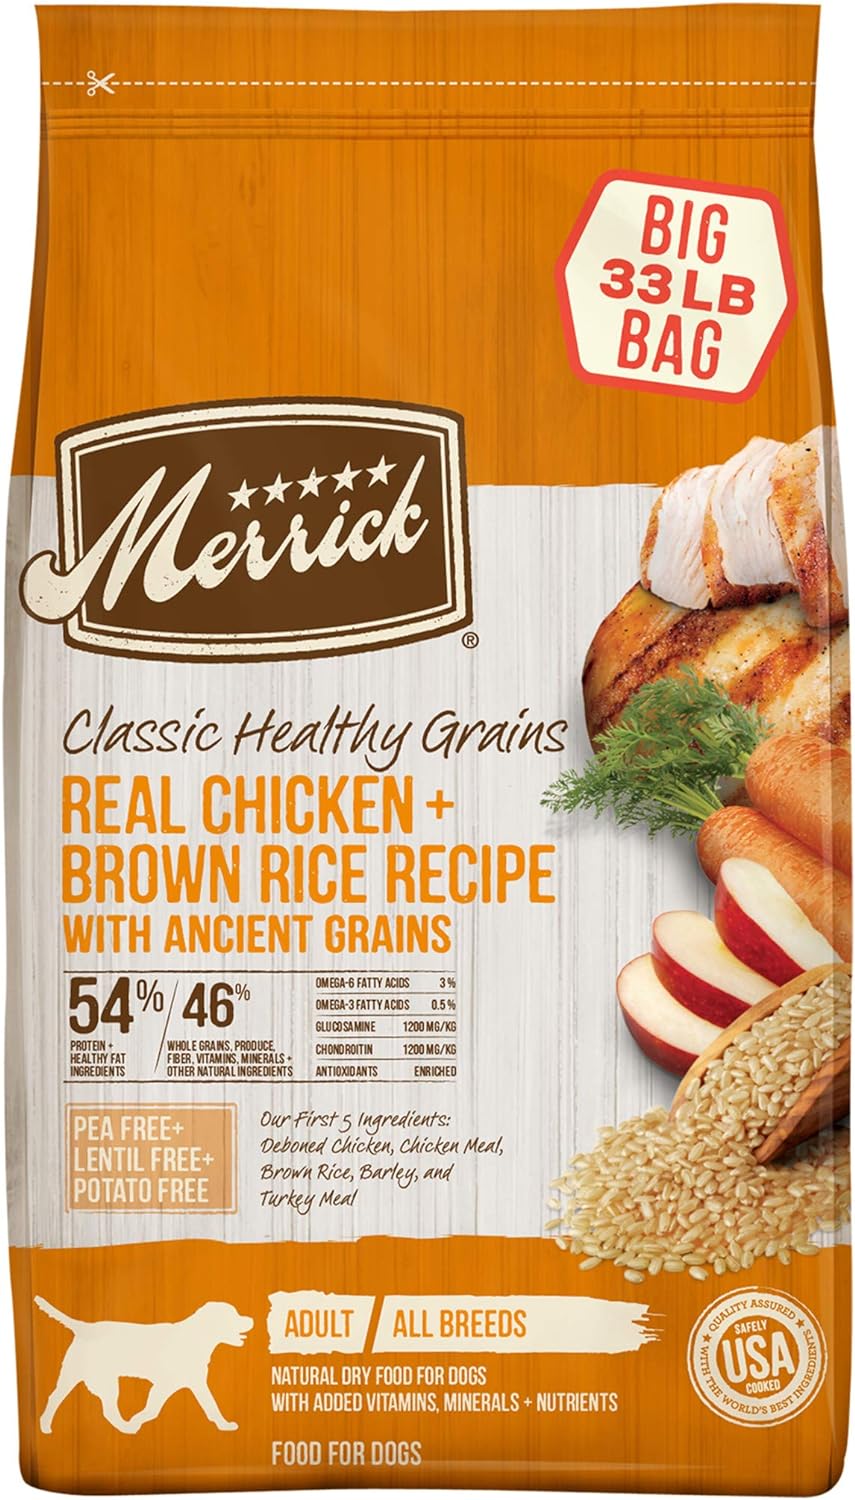 Merrick Classic Healthy Grains Real Chicken + Brown Rice Recipe with Ancient Grains Dry Dog Food – Gallery Image 1